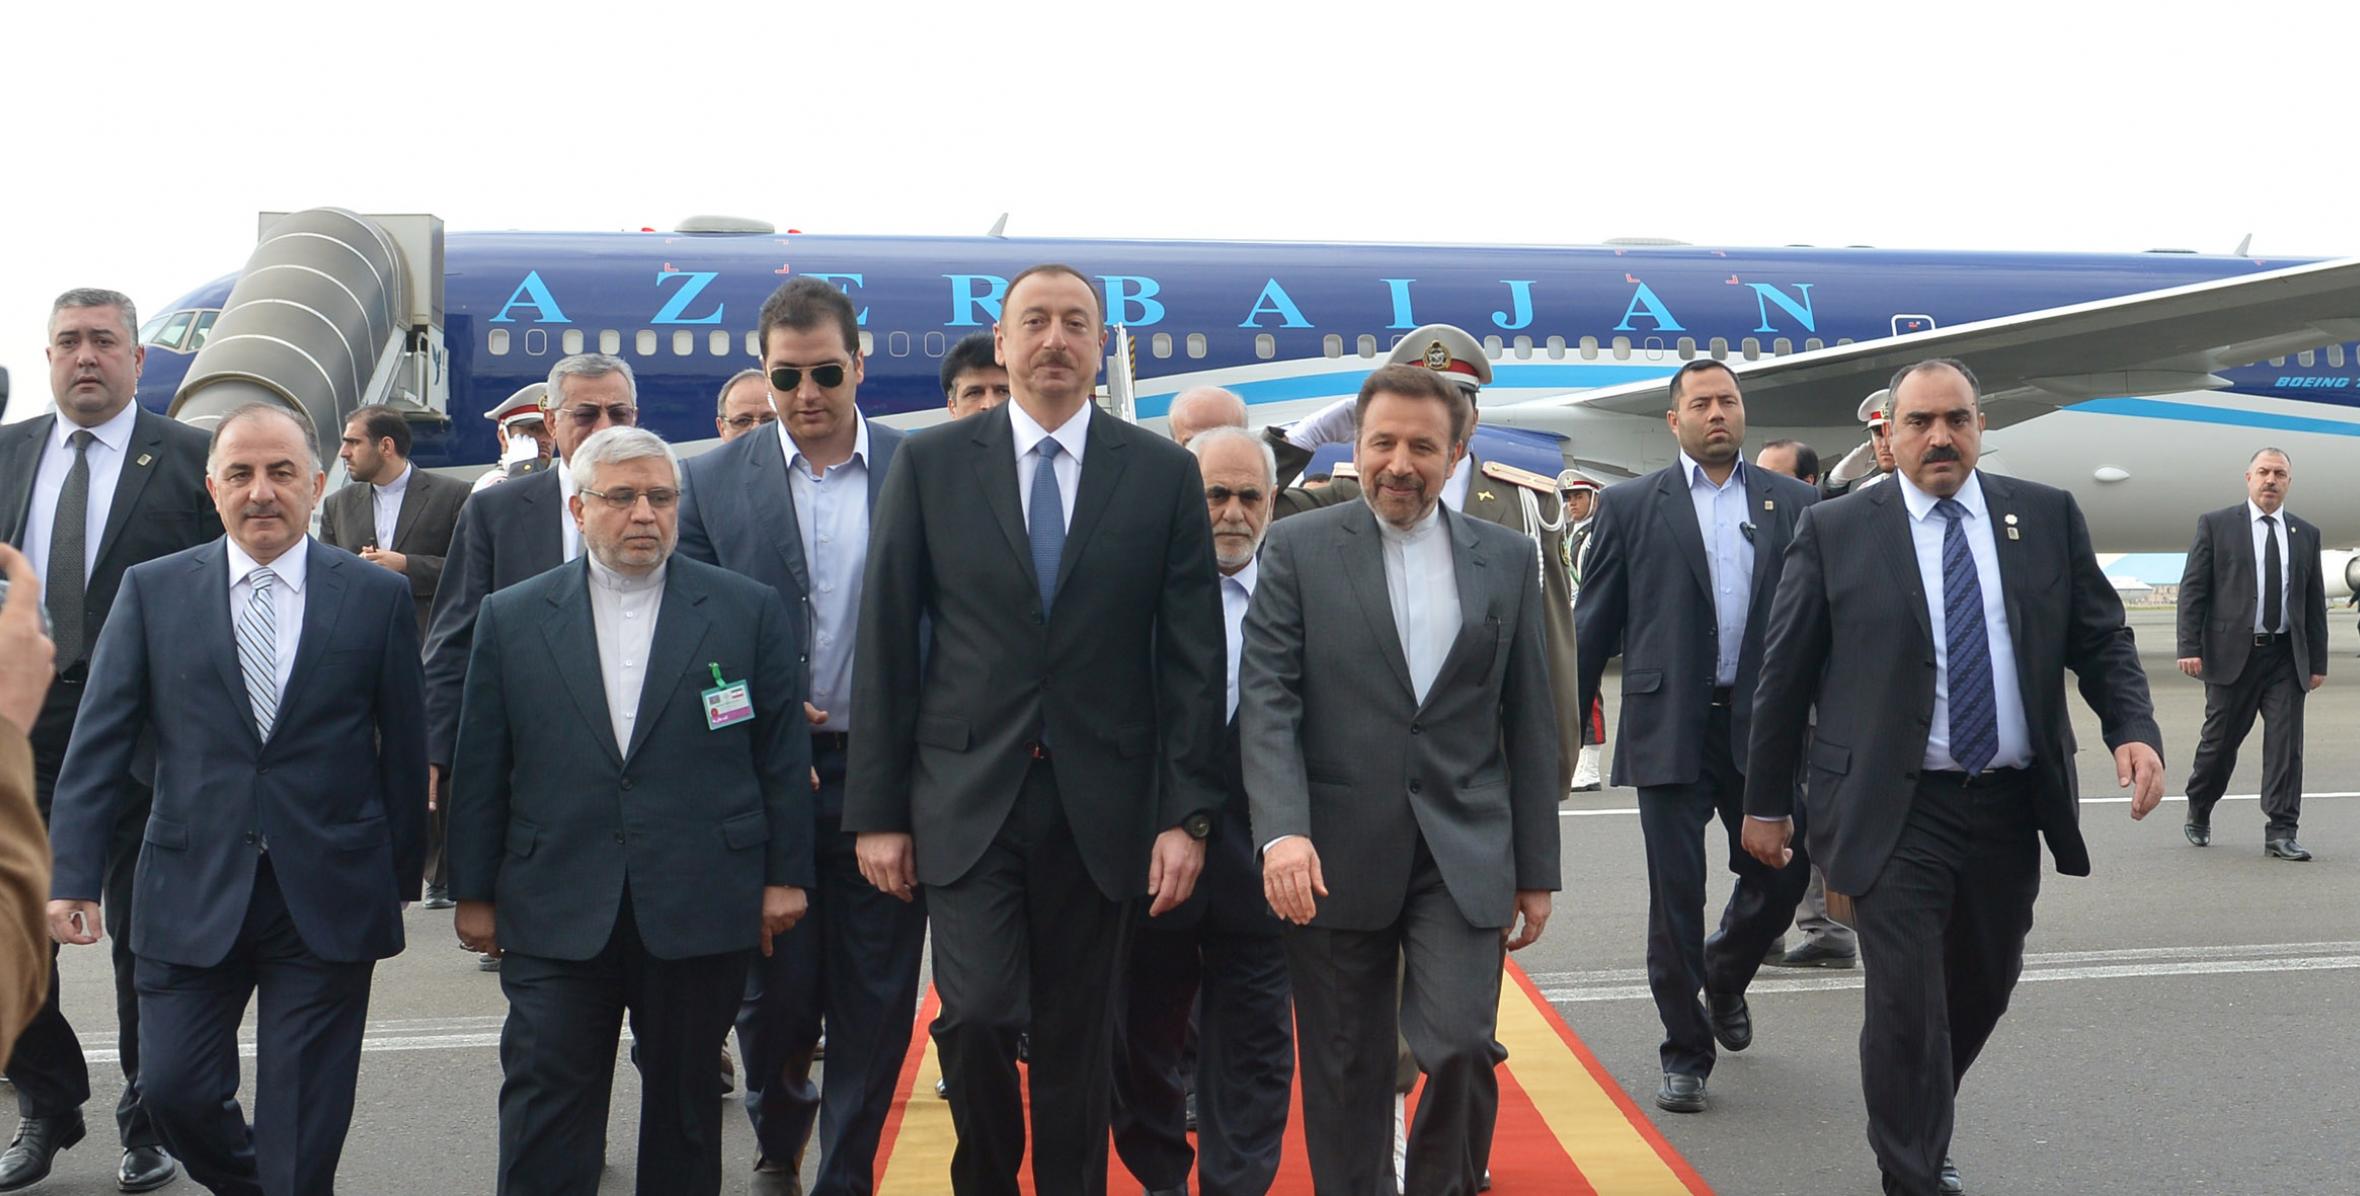 Ilham Aliyev arrived in the Islamic Republic of Iran on official visit